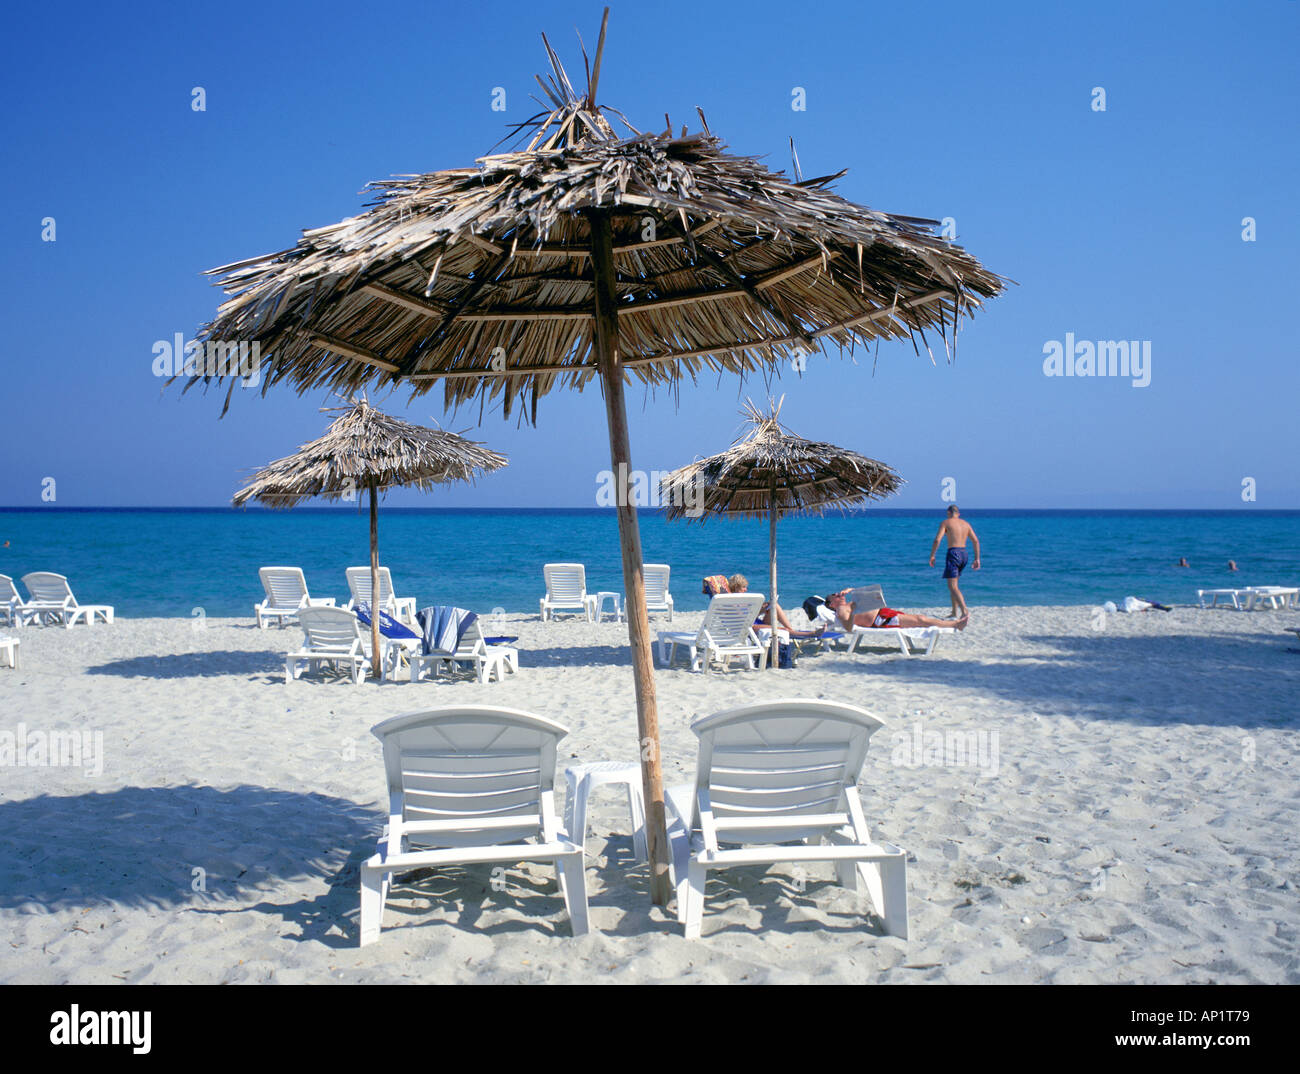 Santorini Beach, Greece with dried palm leaves used as sun shades shadows and blue sea and cloudless sky Stock Photo